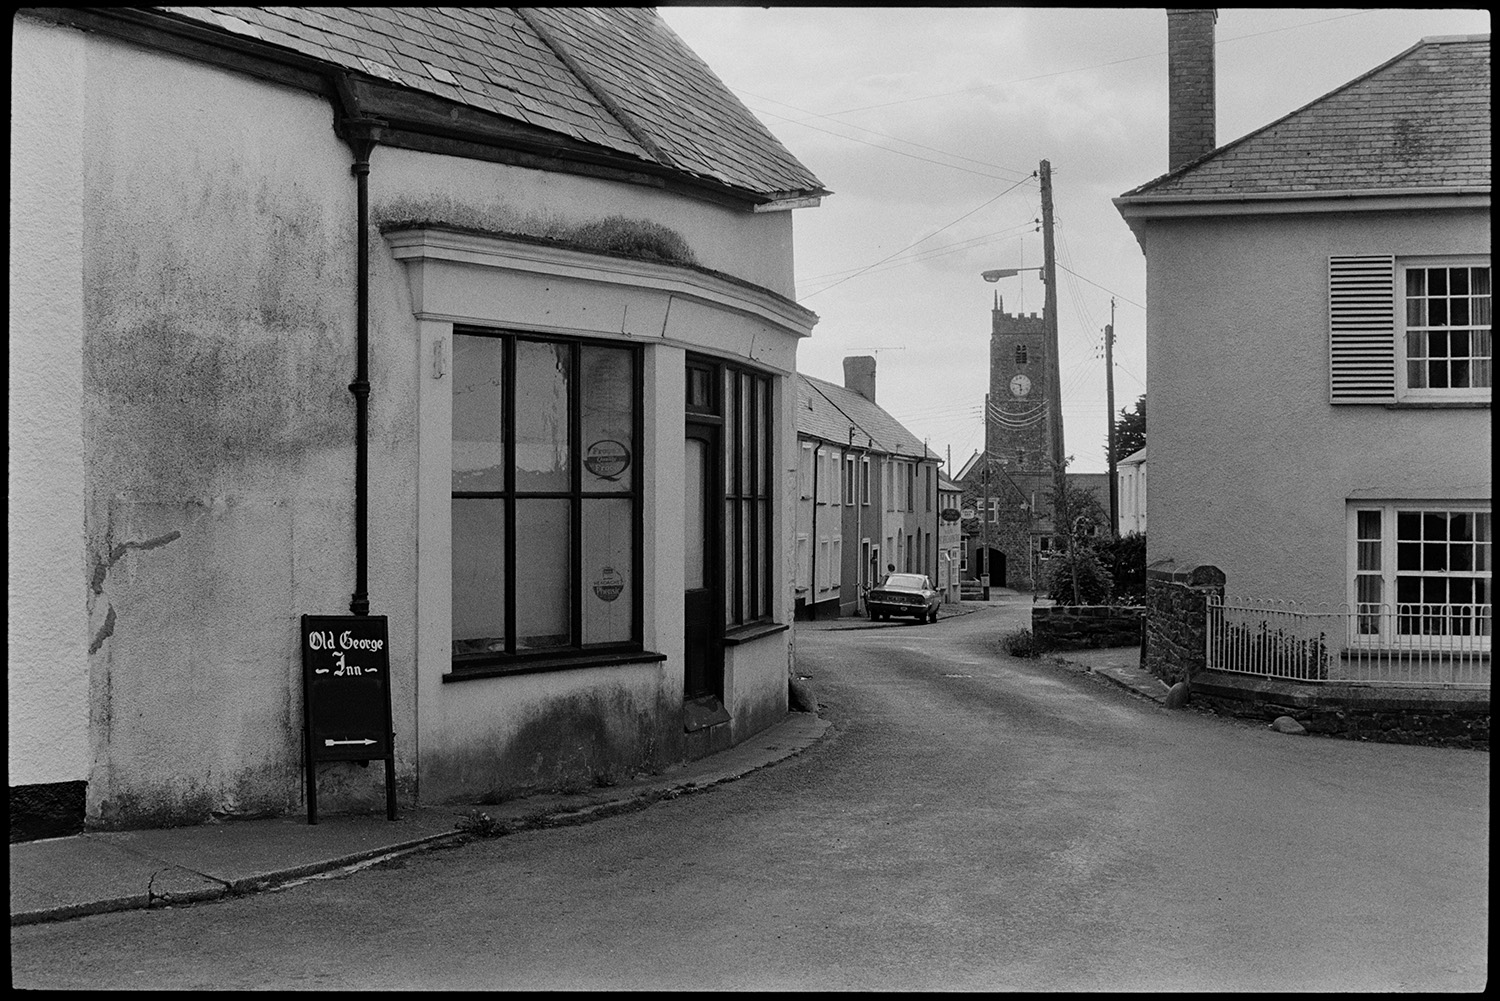 Former village shop and street, comparison with old photo.
[A view looking down the street from the former shop to the church tower in High Bickington. A sign points to the Old George Inn and parts of Howards House can be seen opposite the shop.]